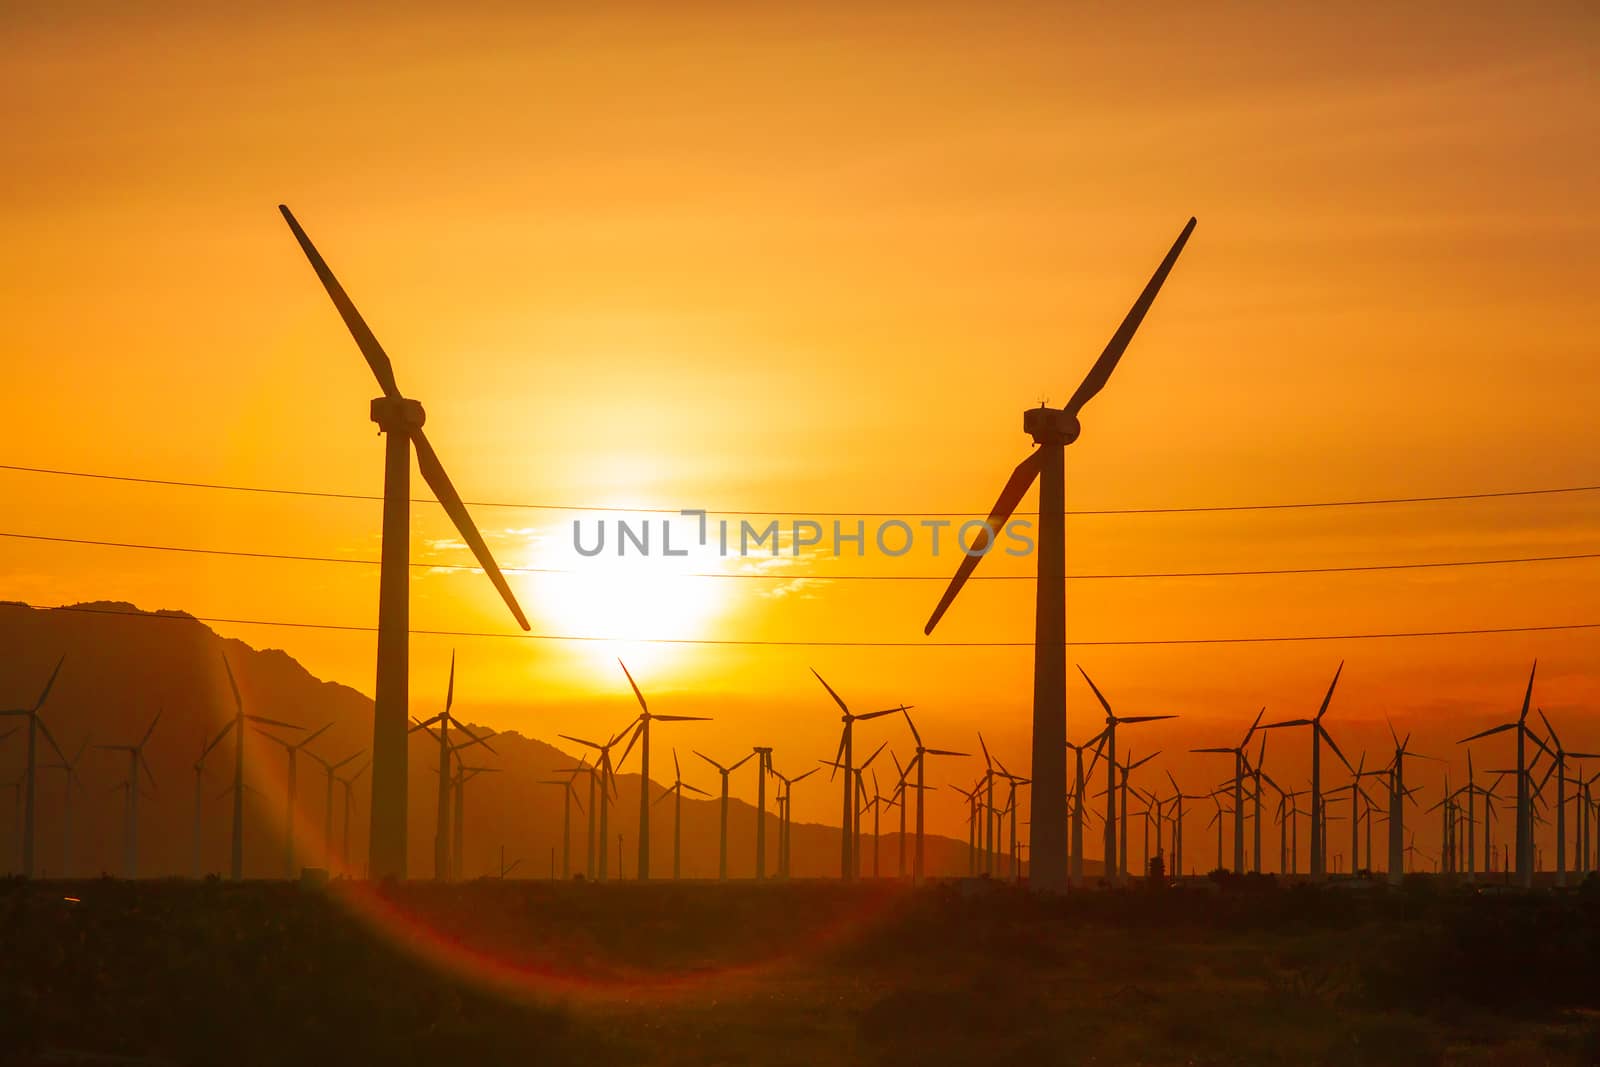 Silhouetted Wind Turbines Over Dramatic Sunset Sky by Feverpitched